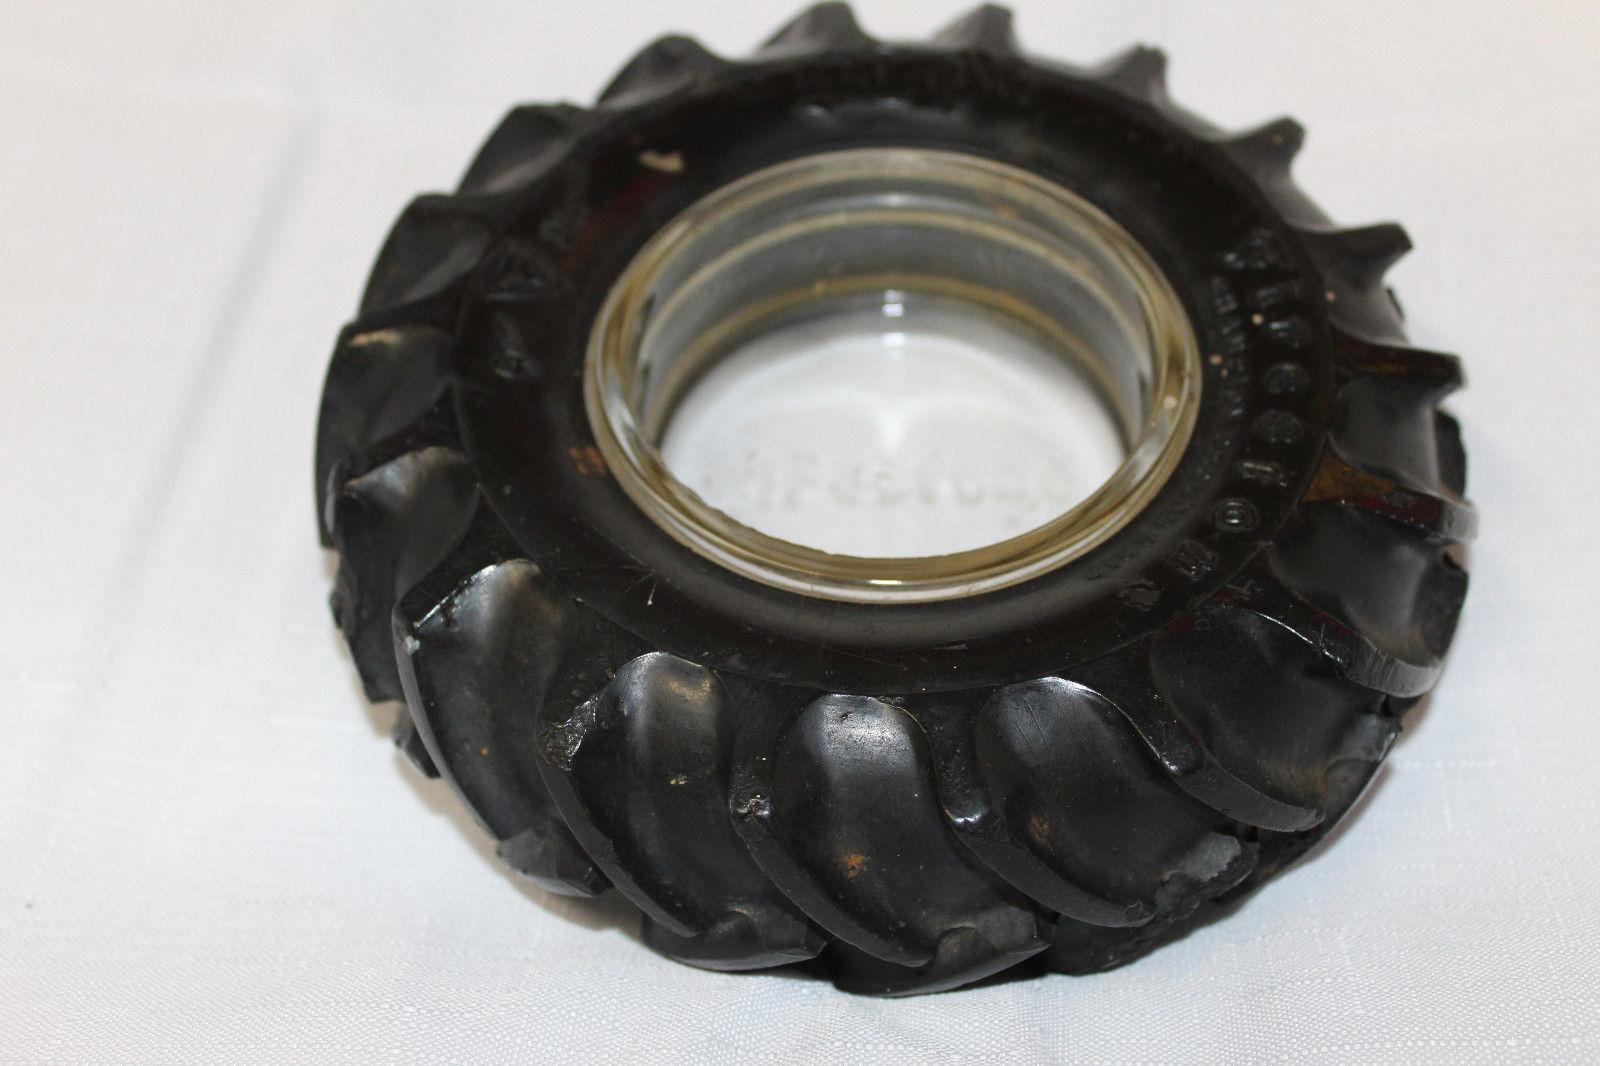 The date when rubber tire ashtrays were first introduced is unknown, but very likely it was in the 1920s. Their method of production is by molds and that form of rubber technology came into wide use by novelty makers during the Roaring 20s. Branded